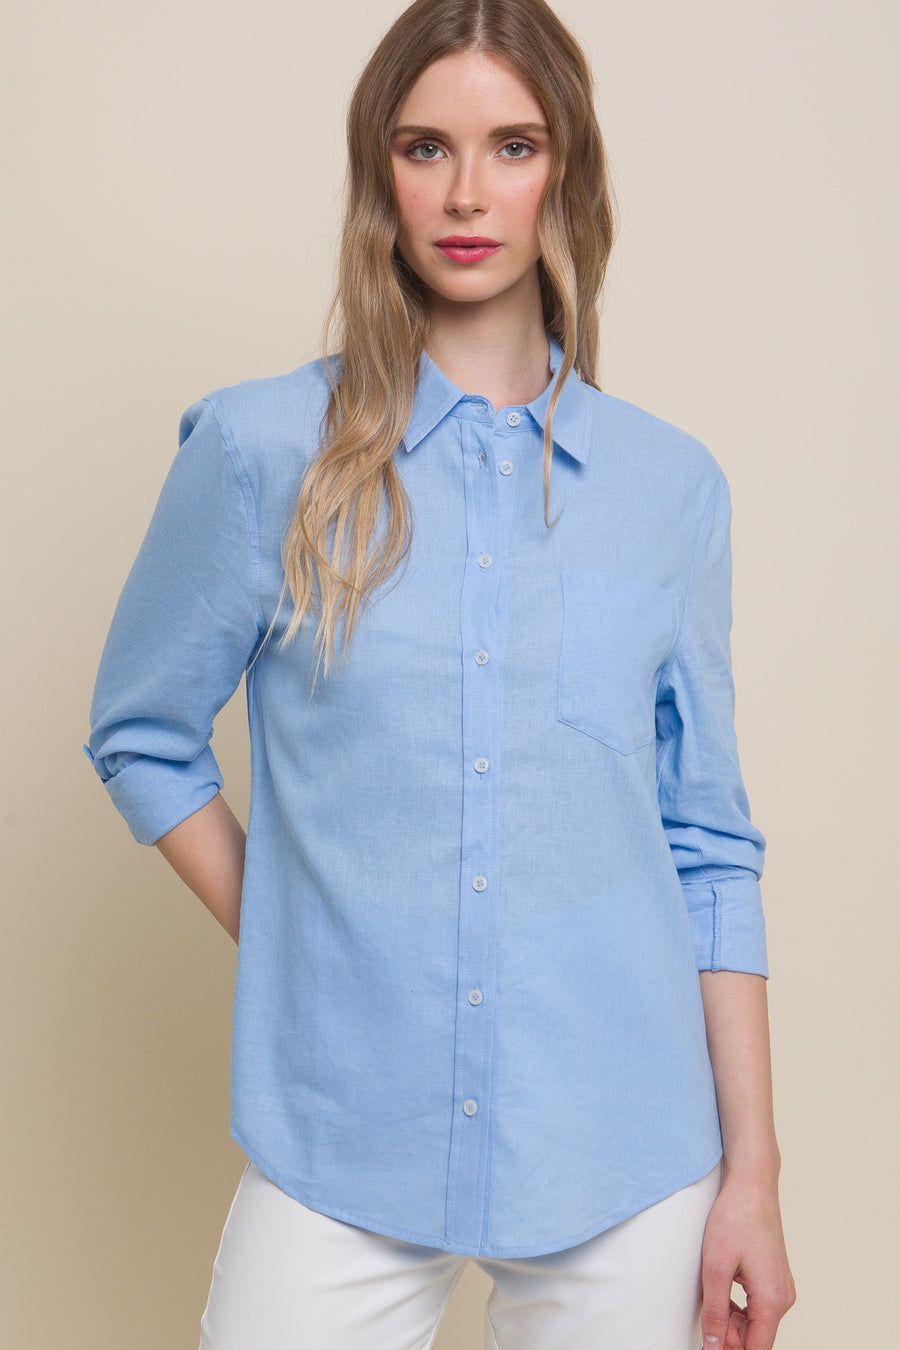 Featuring a collard linen button up with front chest pocket in the color light blue 